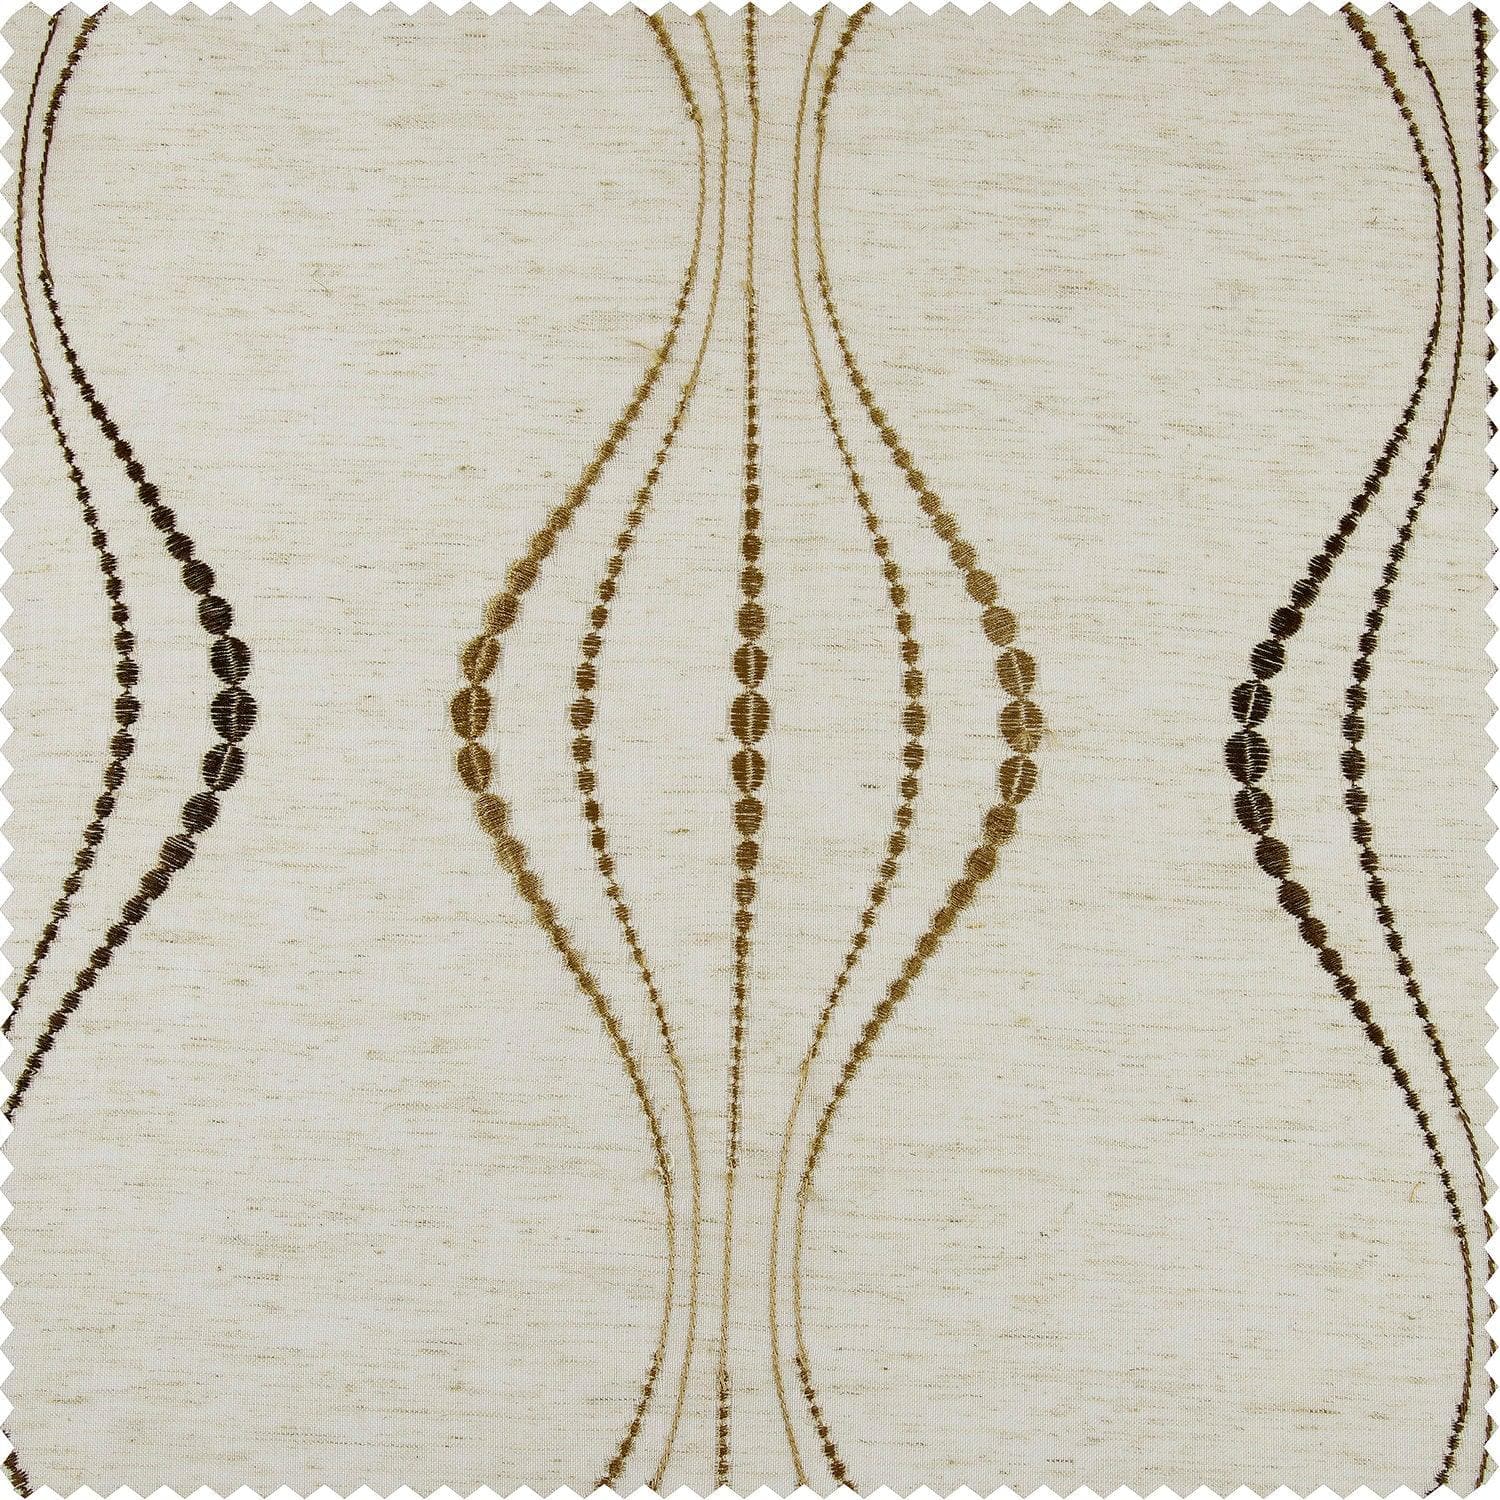 Global Copper Embroidered Linen Sheer Curtain Pair (2 Panels)